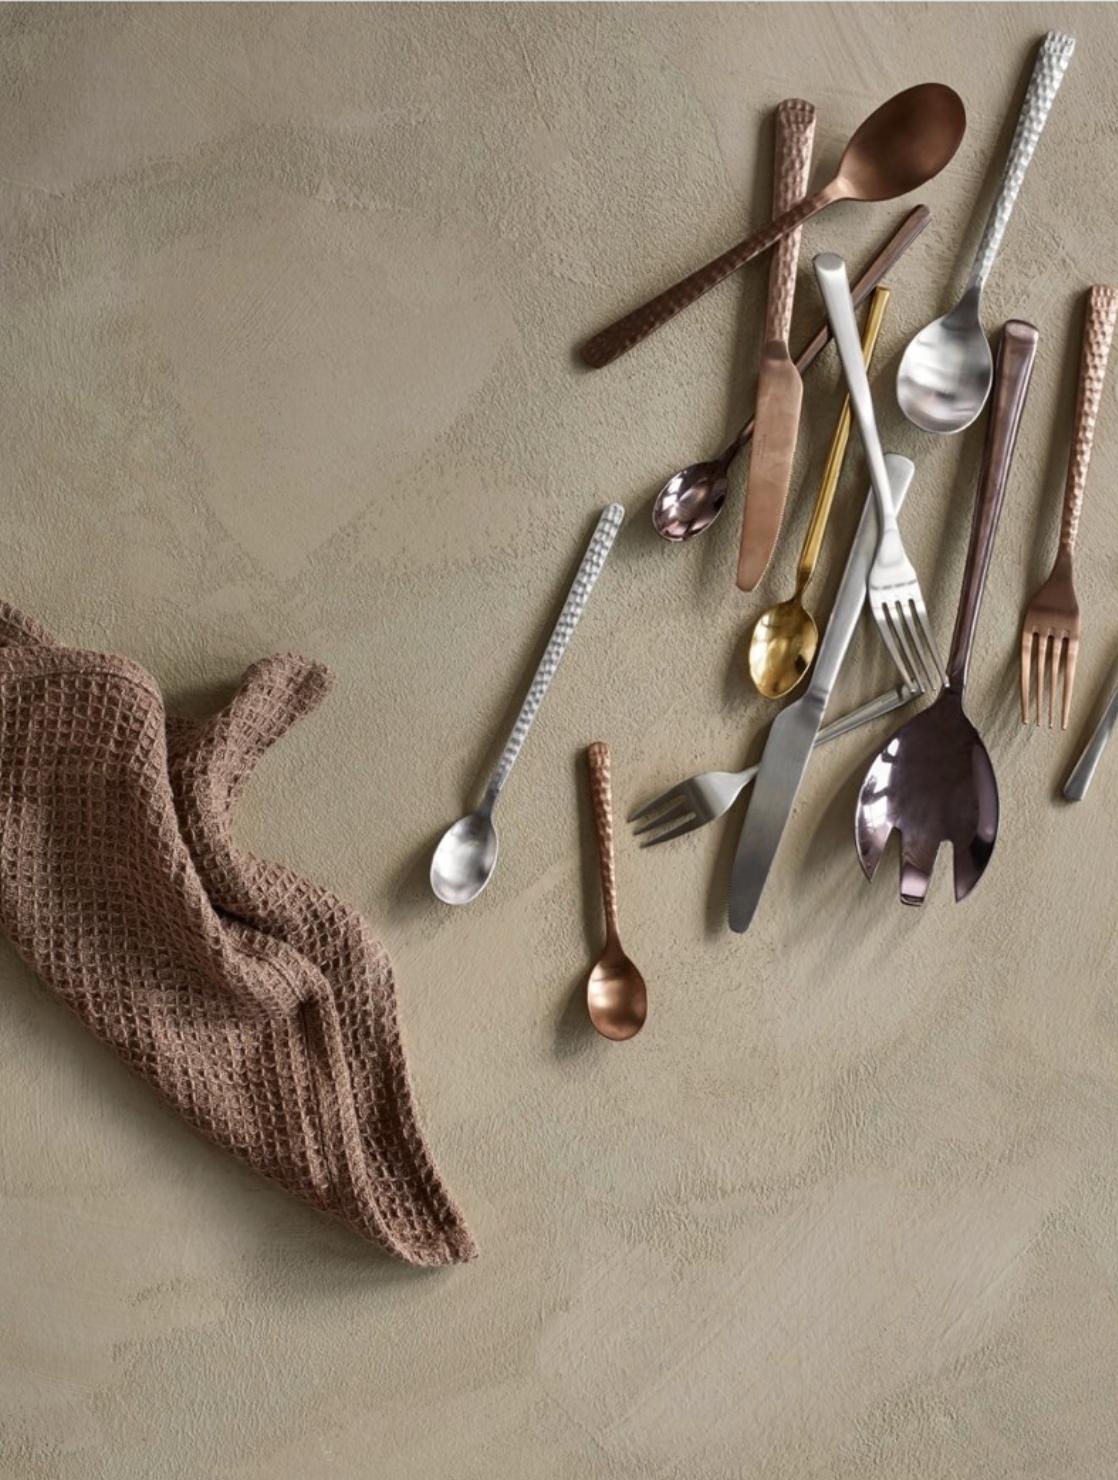   Hammered Cutlery Hune ,  Hammered Cutlery Stain Steel ,  Salad Serving Set Hune,   Cutlery Hune Stain Steel ,  Teaspoon Tvis Stainless Steel , and  Dishcloth Iris Linen  all created by  Broste Copenhagen.   